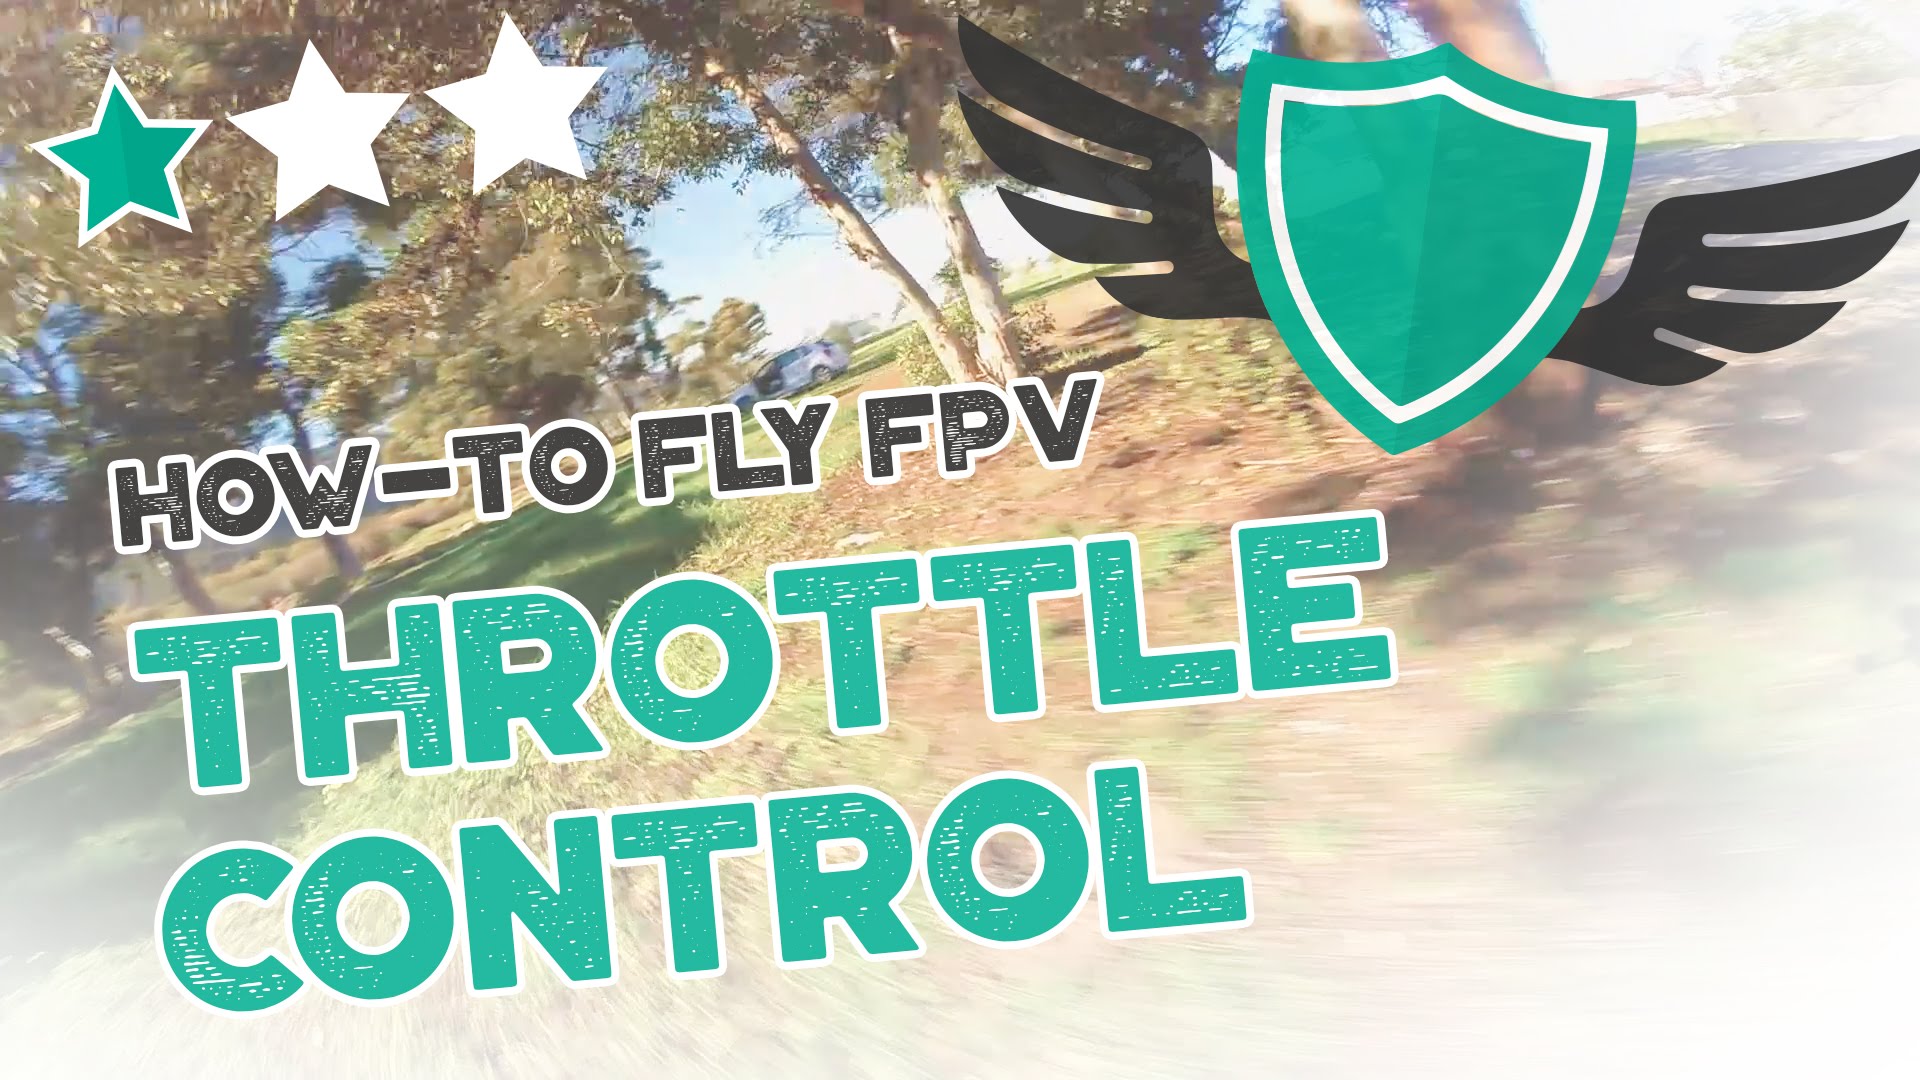 How-to Fly FPV Quadcopters / Drone – “THROTTLE CONTROL AND HEIGHT MANAGEMENT”